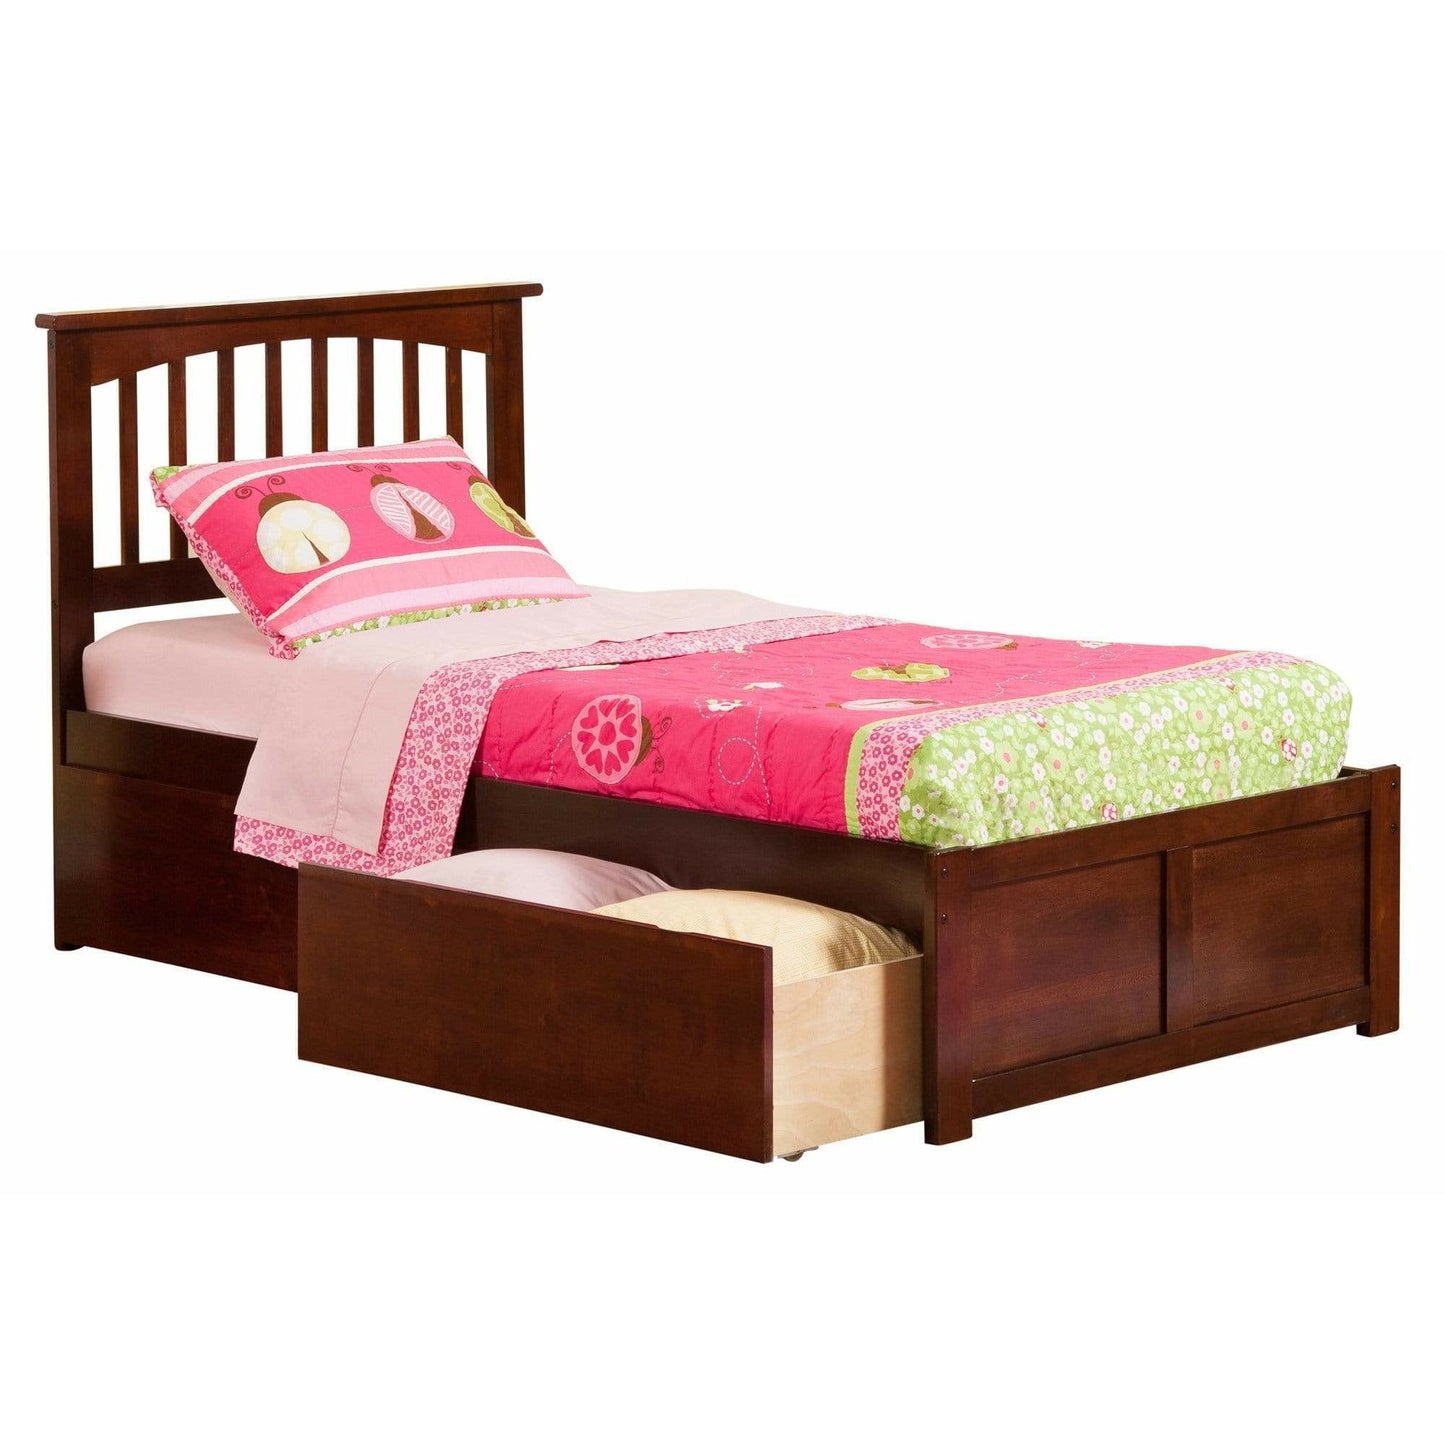 Atlantic Furniture Bed walnut Mission Twin Platform Bed with Flat Panel Foot Board and 2 Urban Bed Drawers in Espresso